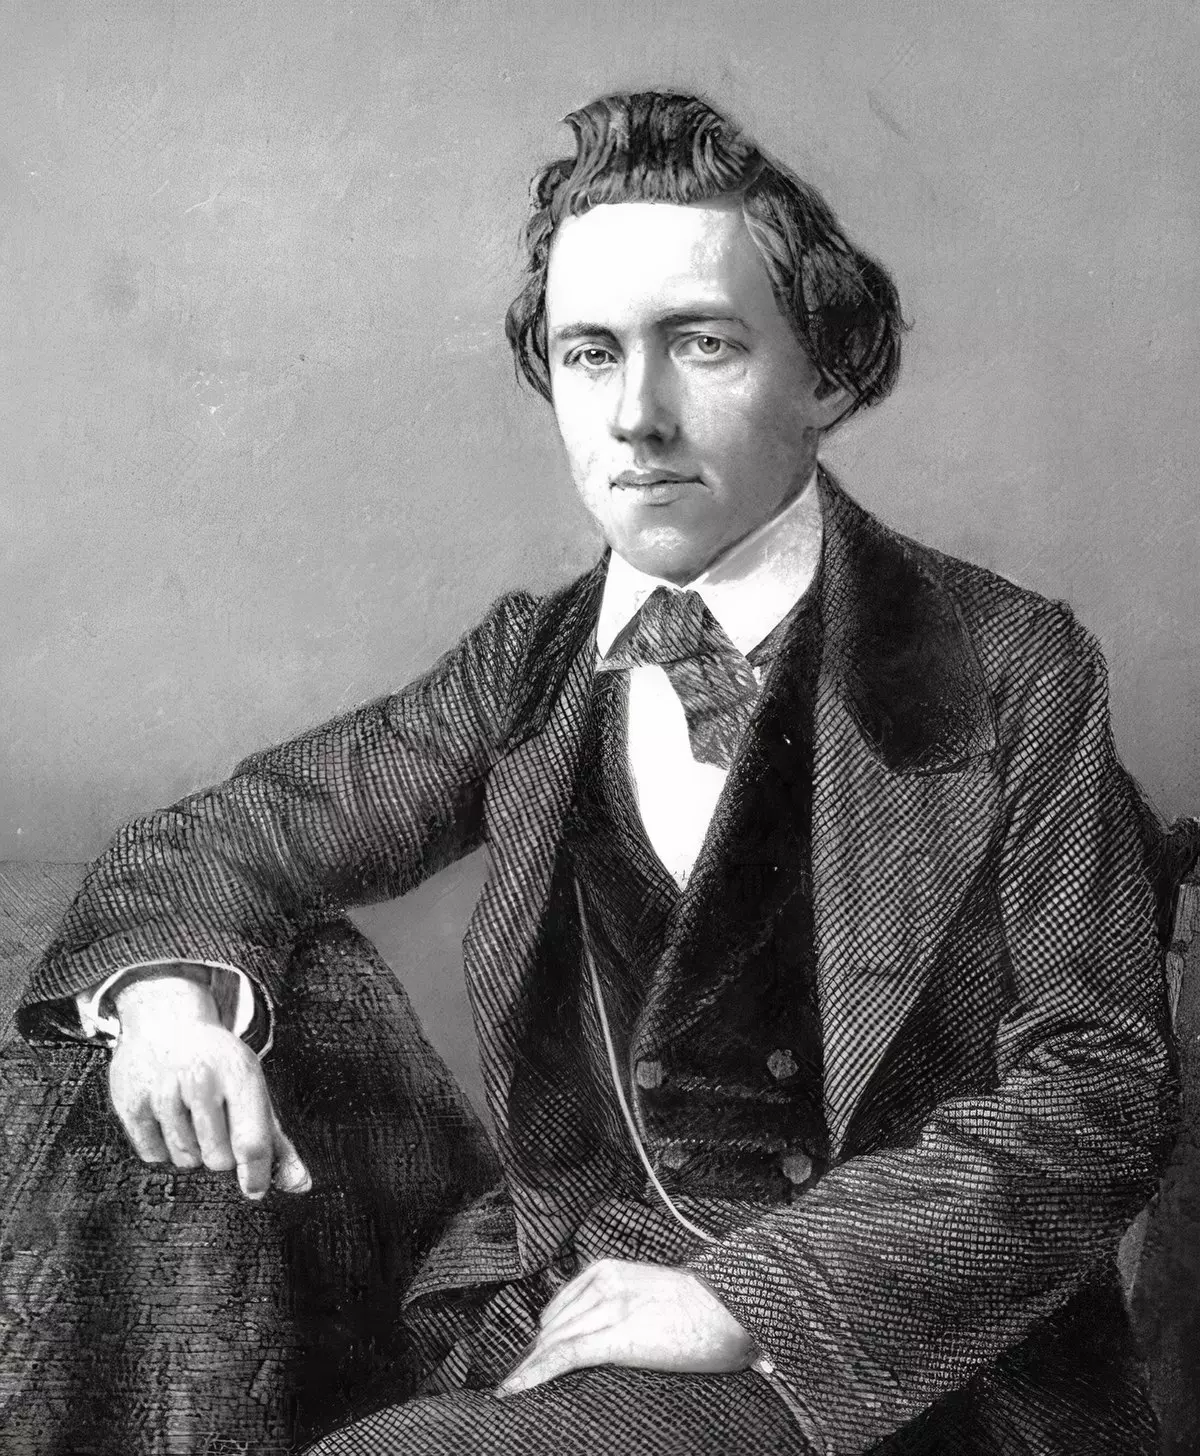 Paul Morphy: The First of the Conquering American Chess Heroes